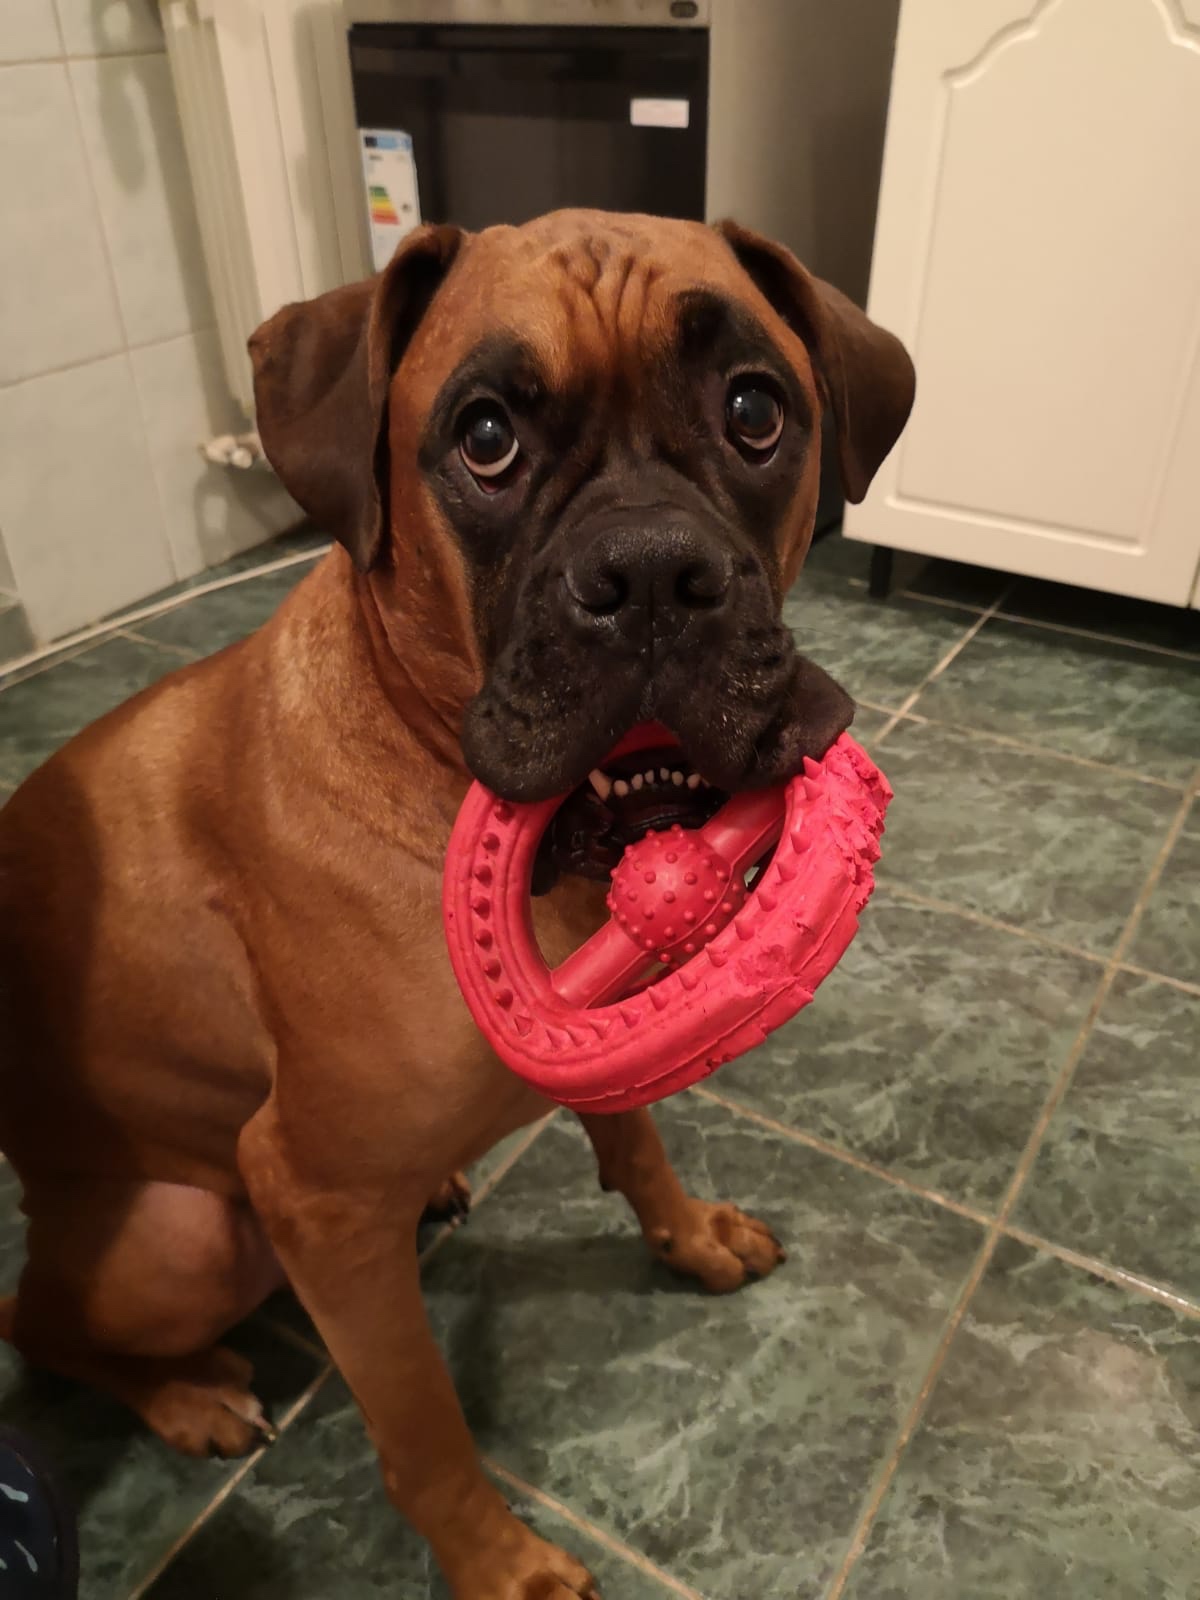 Boxer Dog sitting on the bathroom floor with a chew toy on its mouth